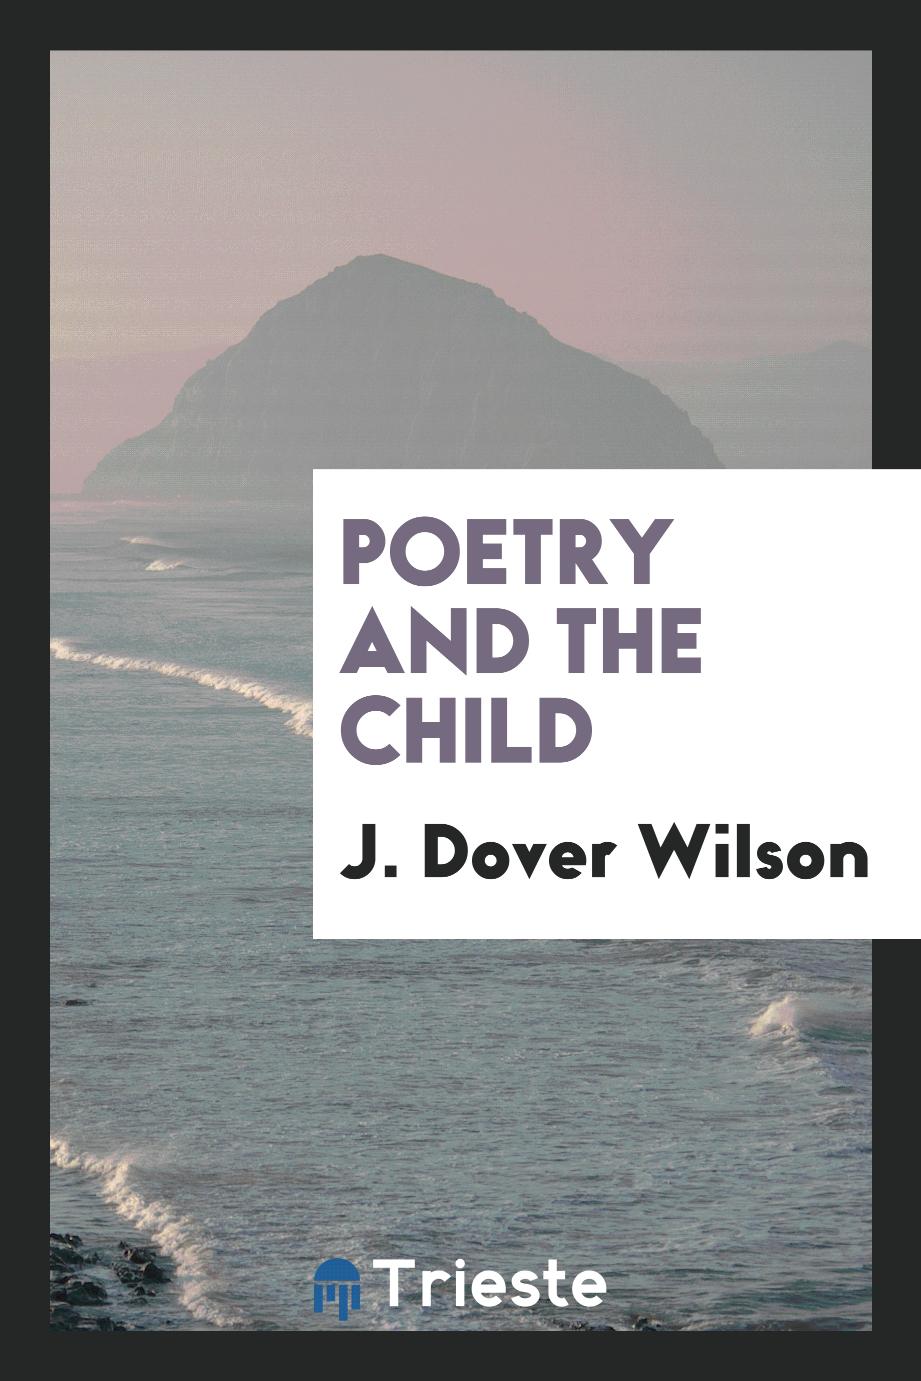 Poetry and the child